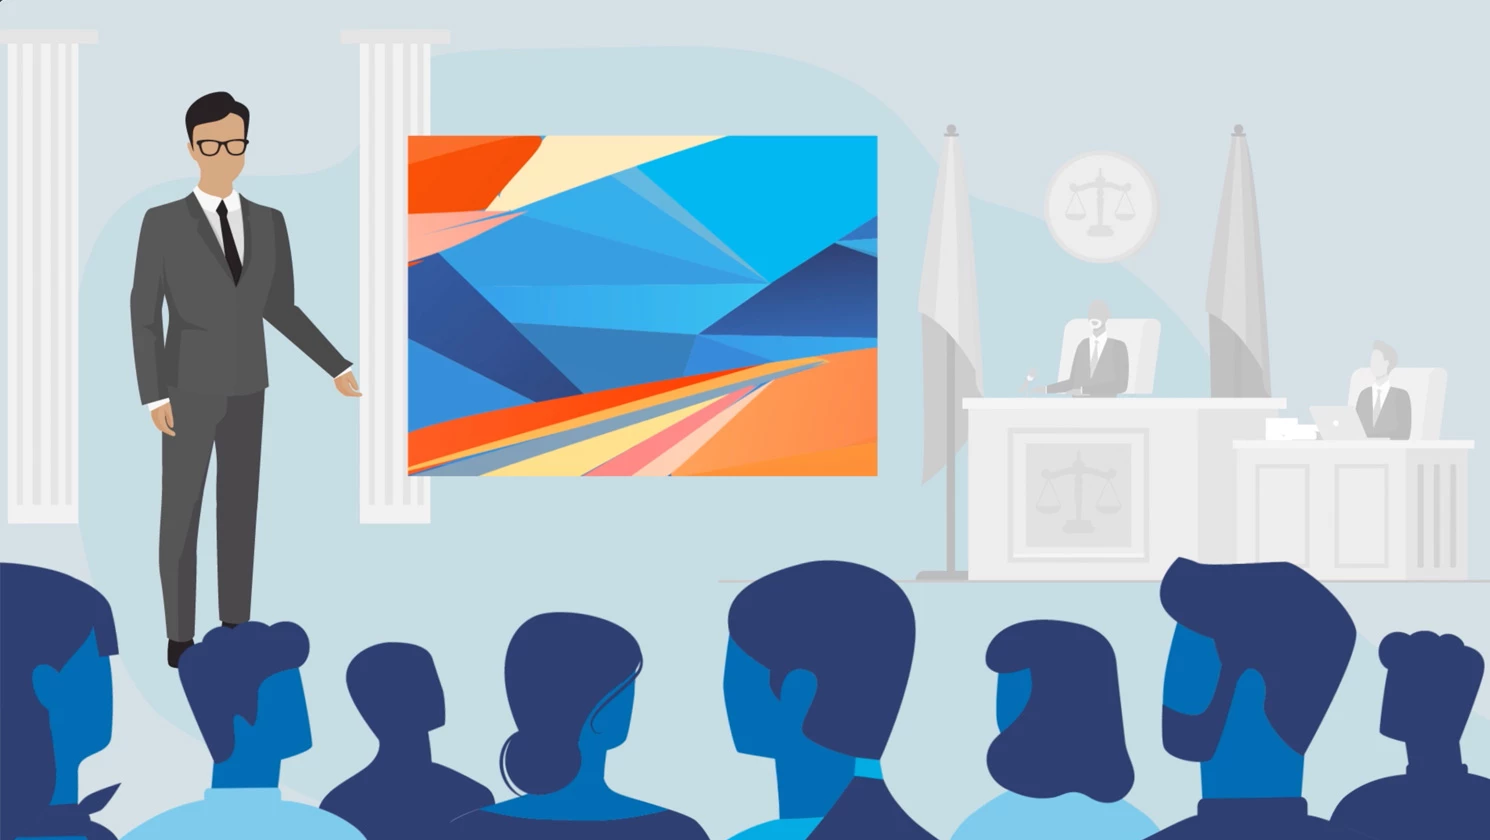 Illustration of a courtroom, lawyer presenting a graphic to the jury